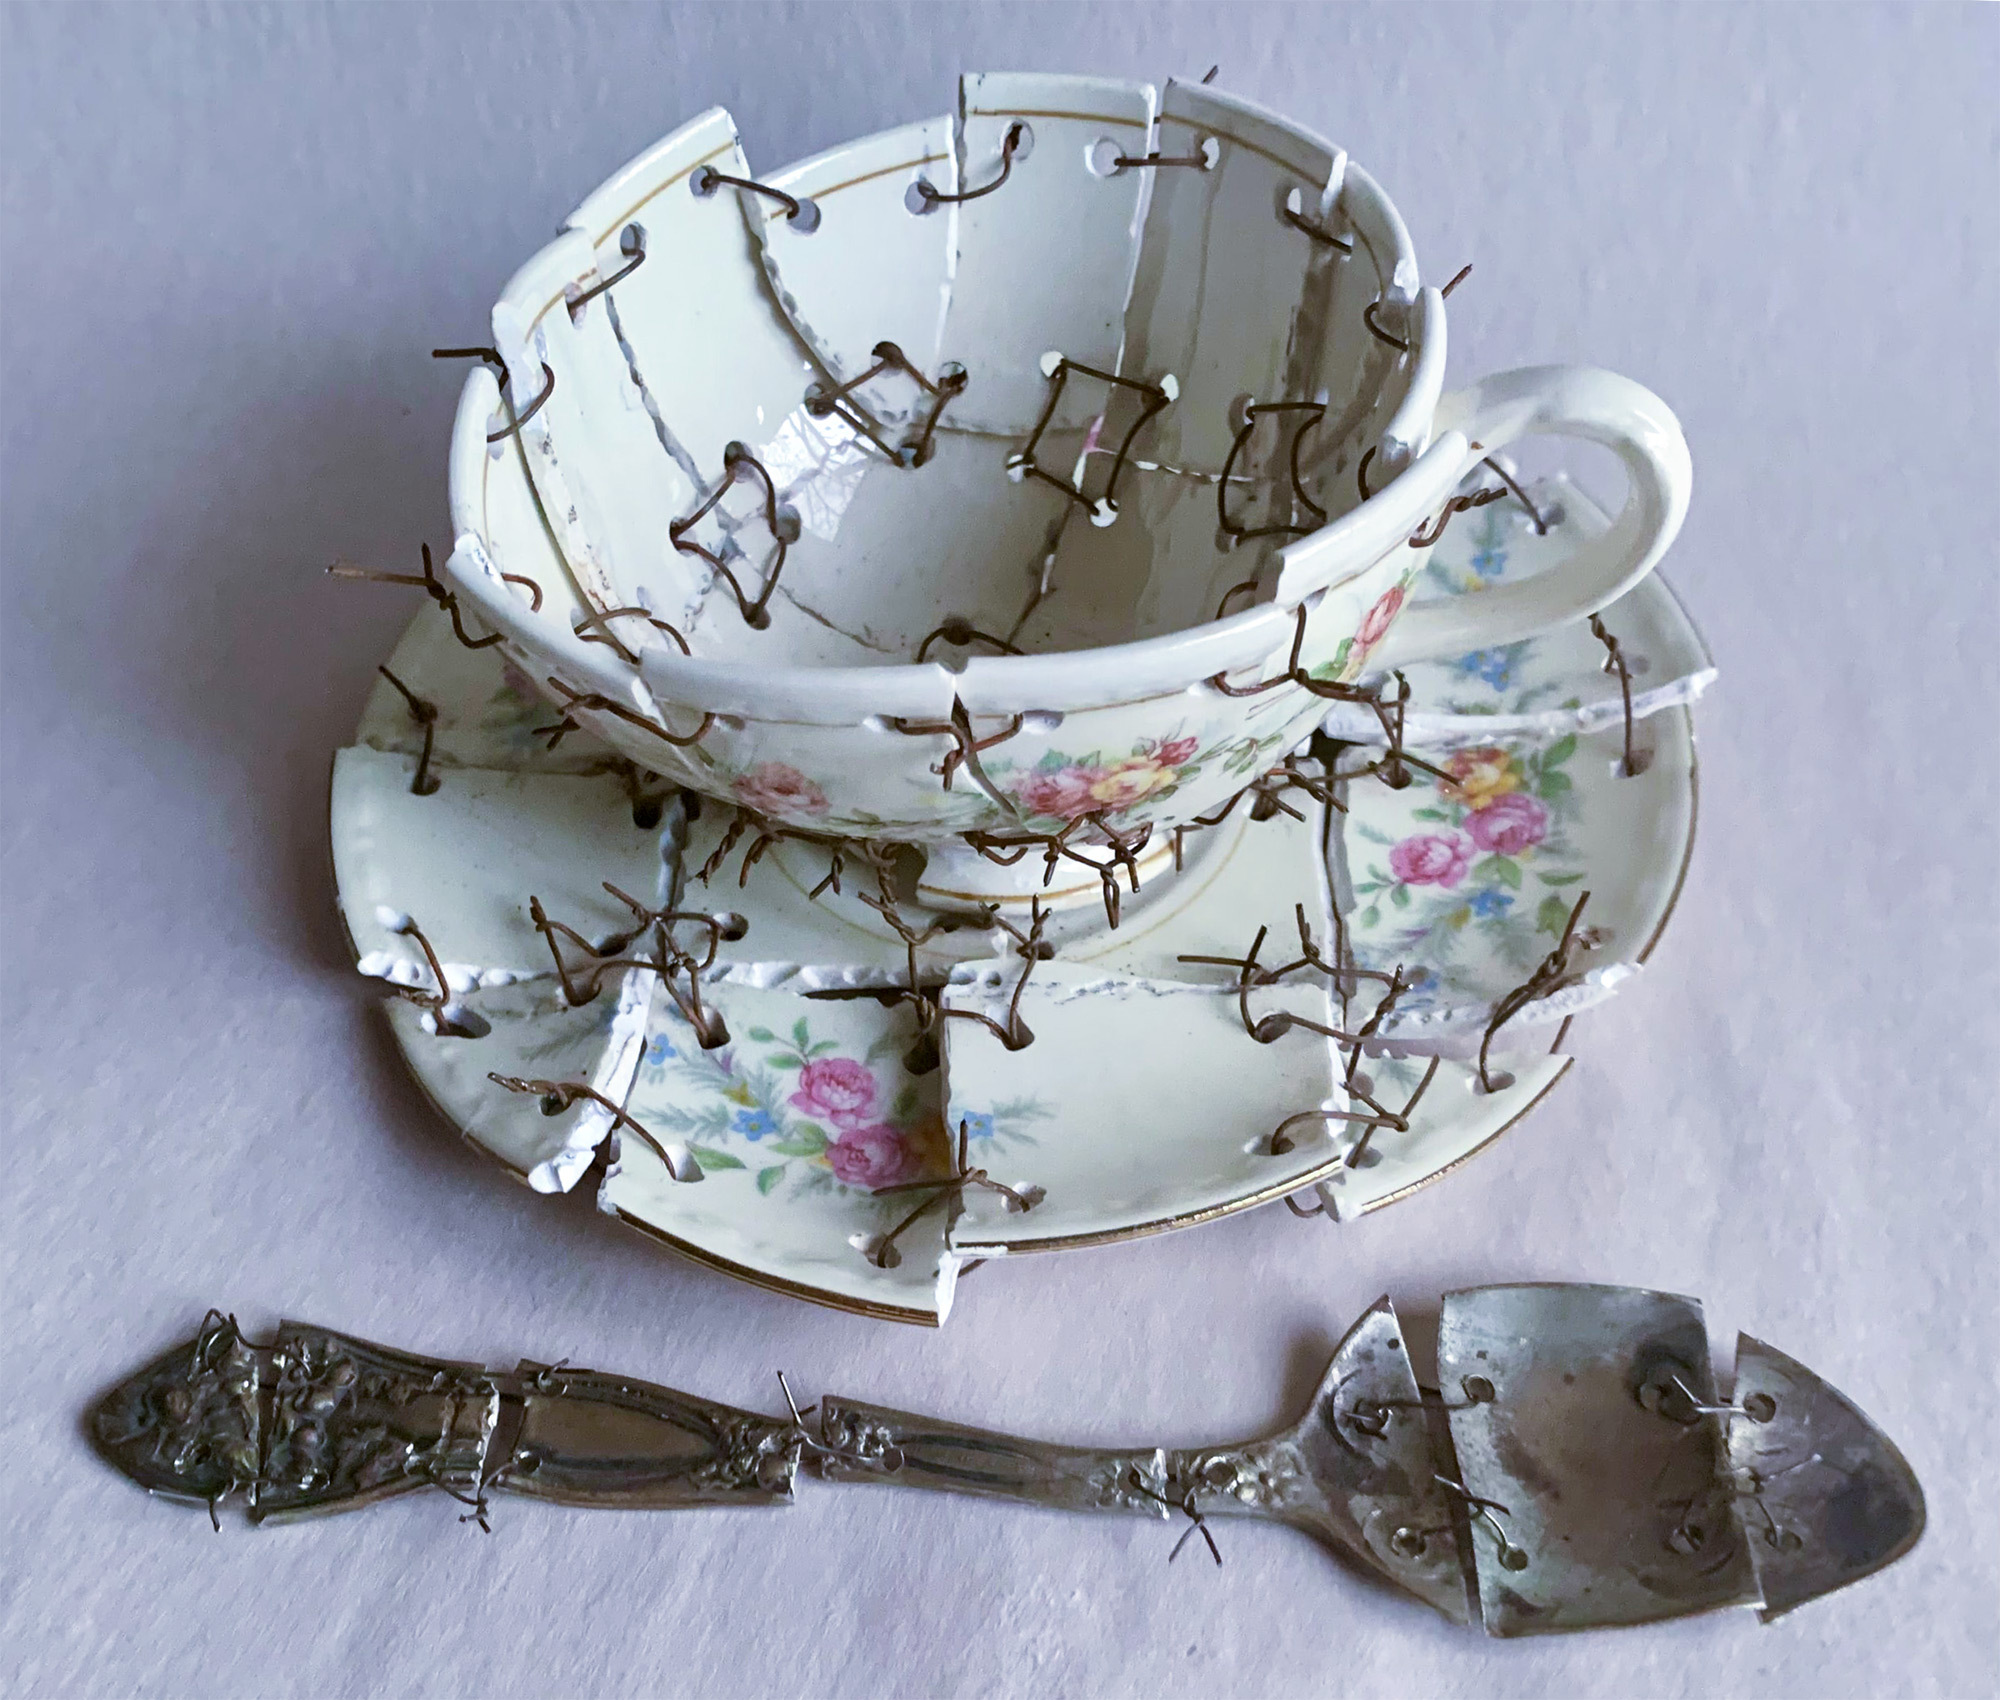 Barbed Wire Chains and Shears Cleave Through Delicate Pottery in | RetinaComics